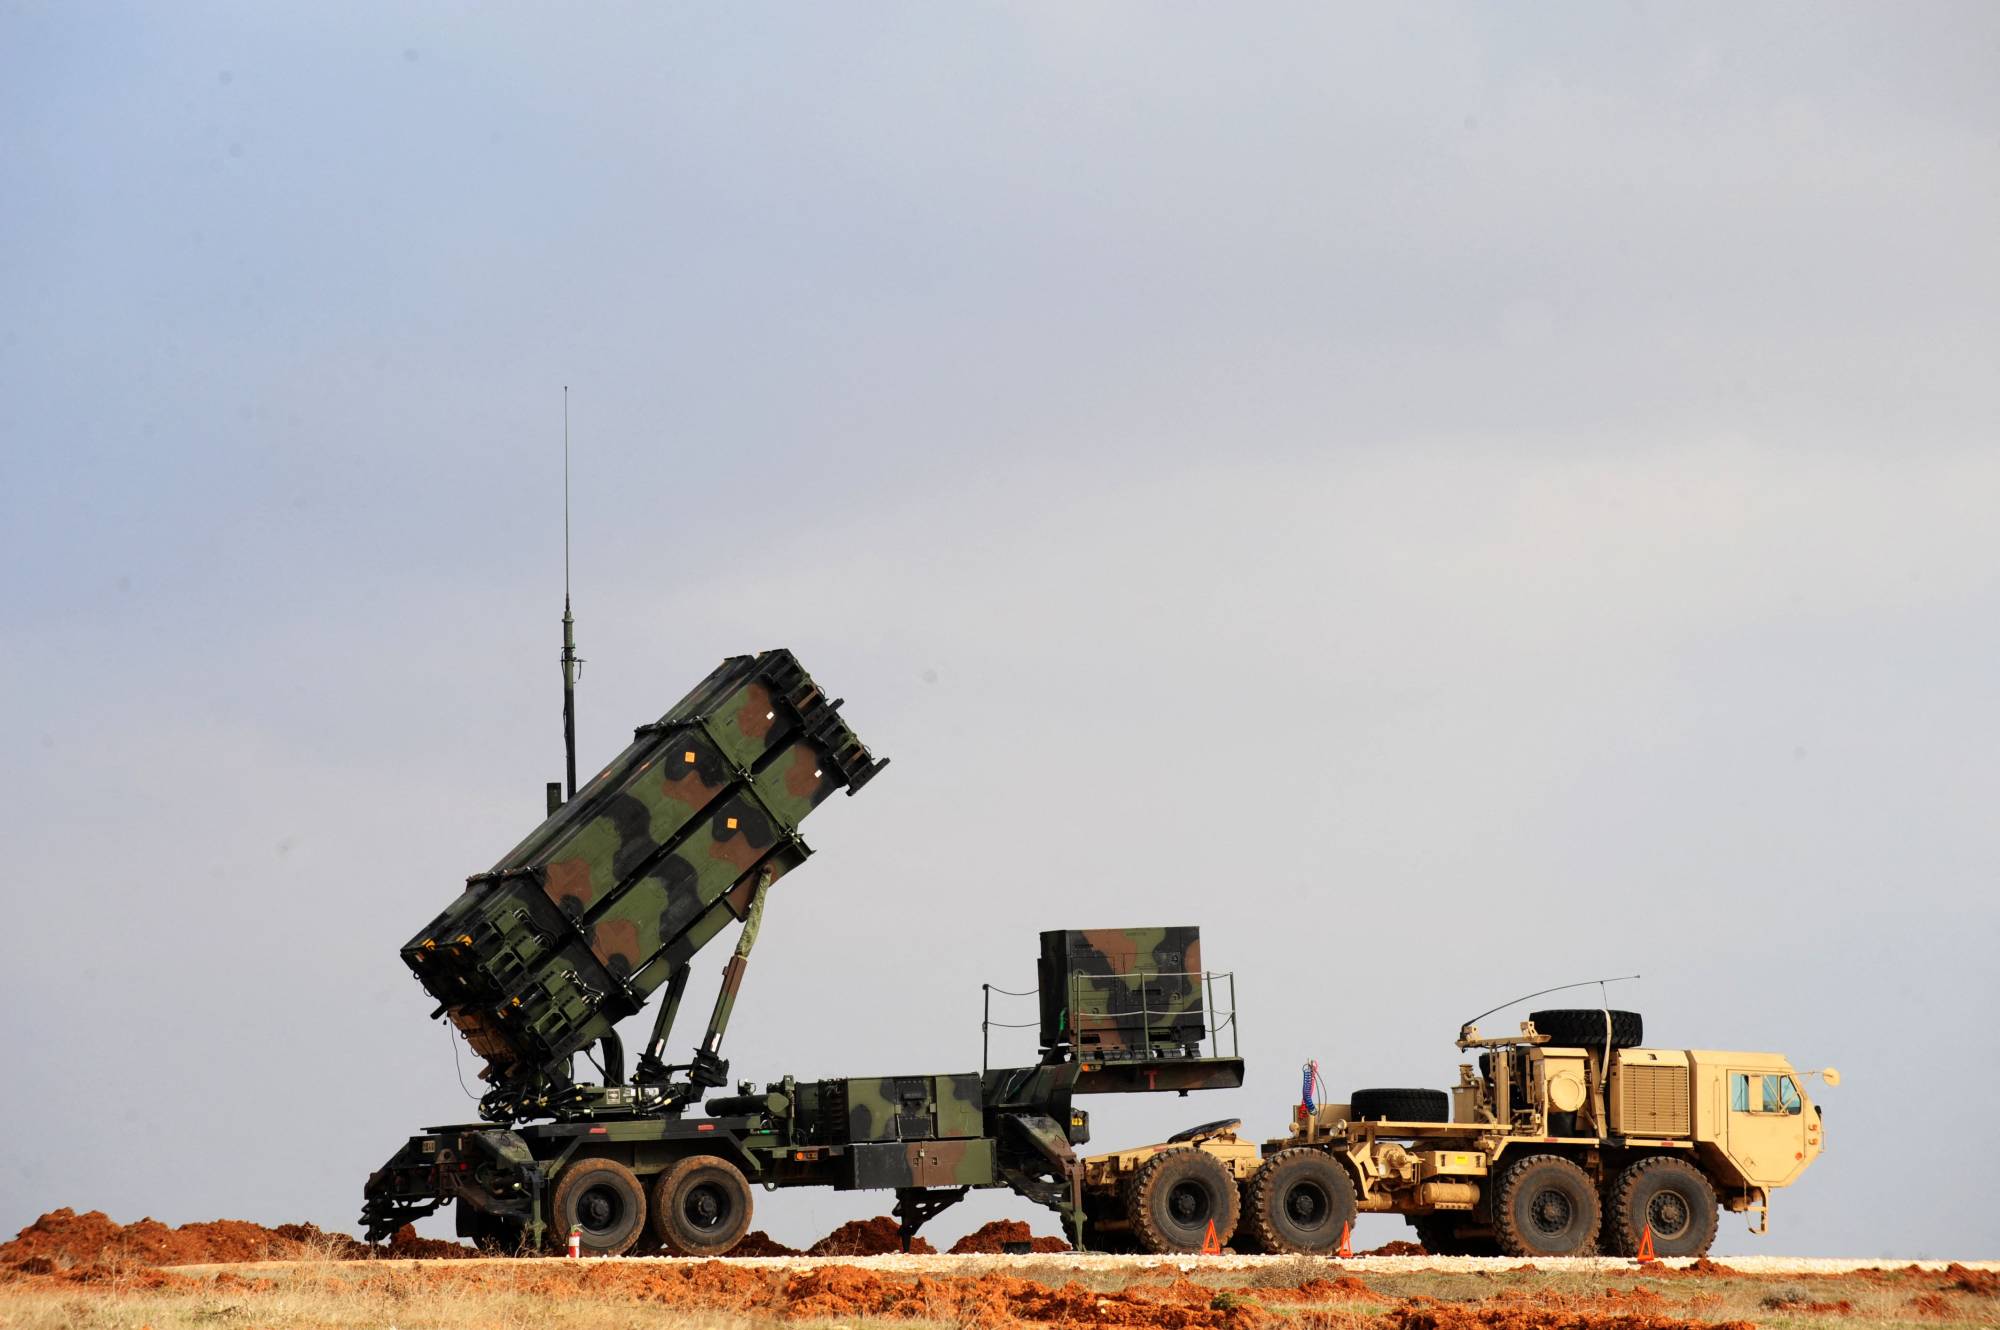 A Patriot missile launcher system at a Turkish military base in Gaziantep in February 2013. | AFP-JIJI